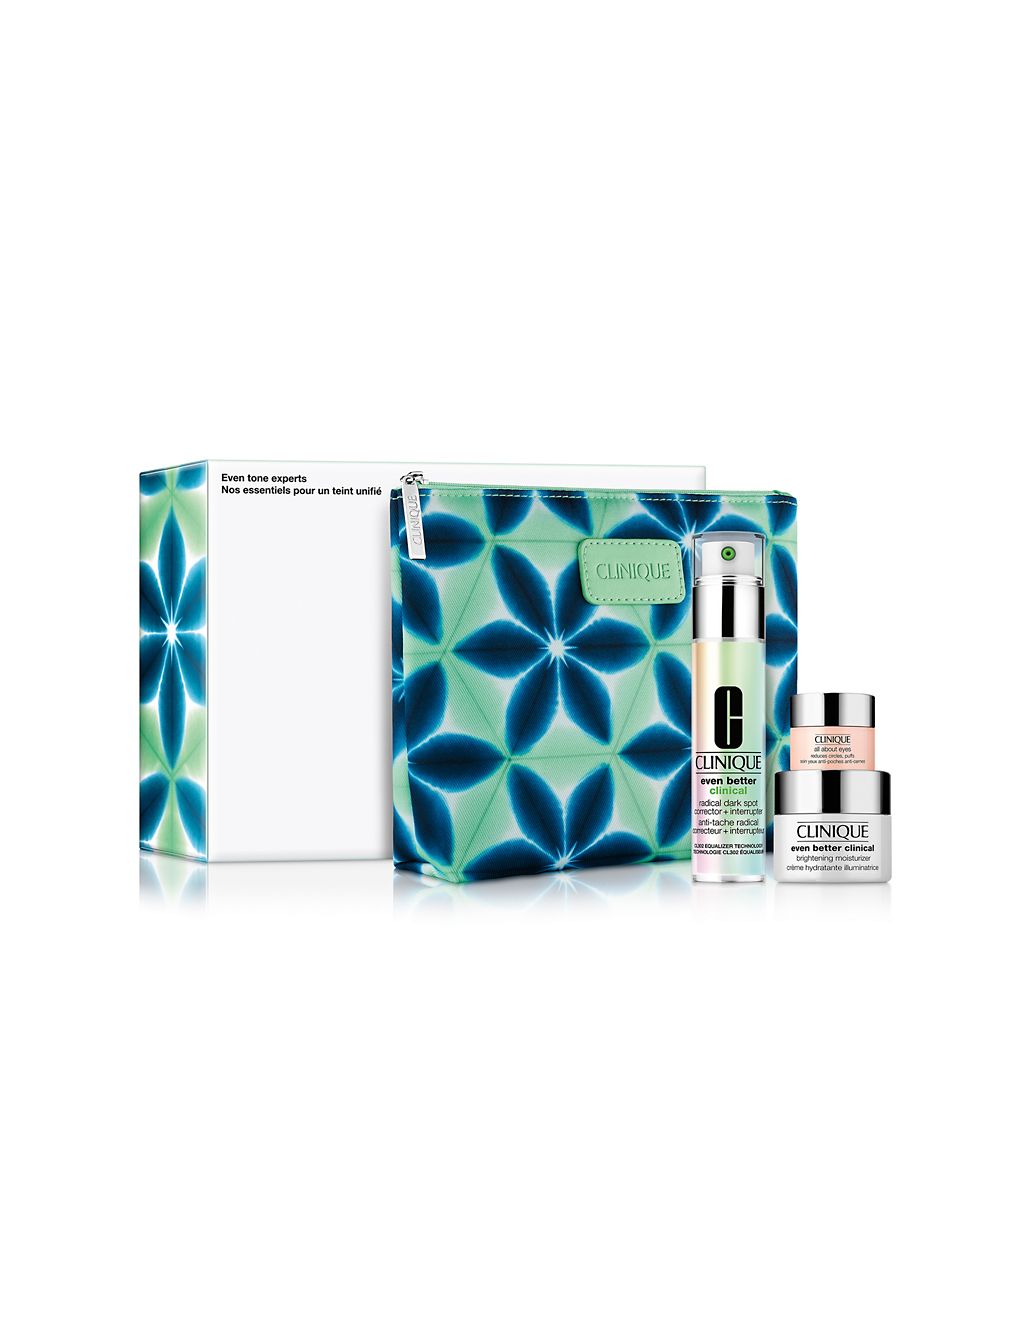 Even Tone Experts: Brightening Skincare Gift Set 3 of 5